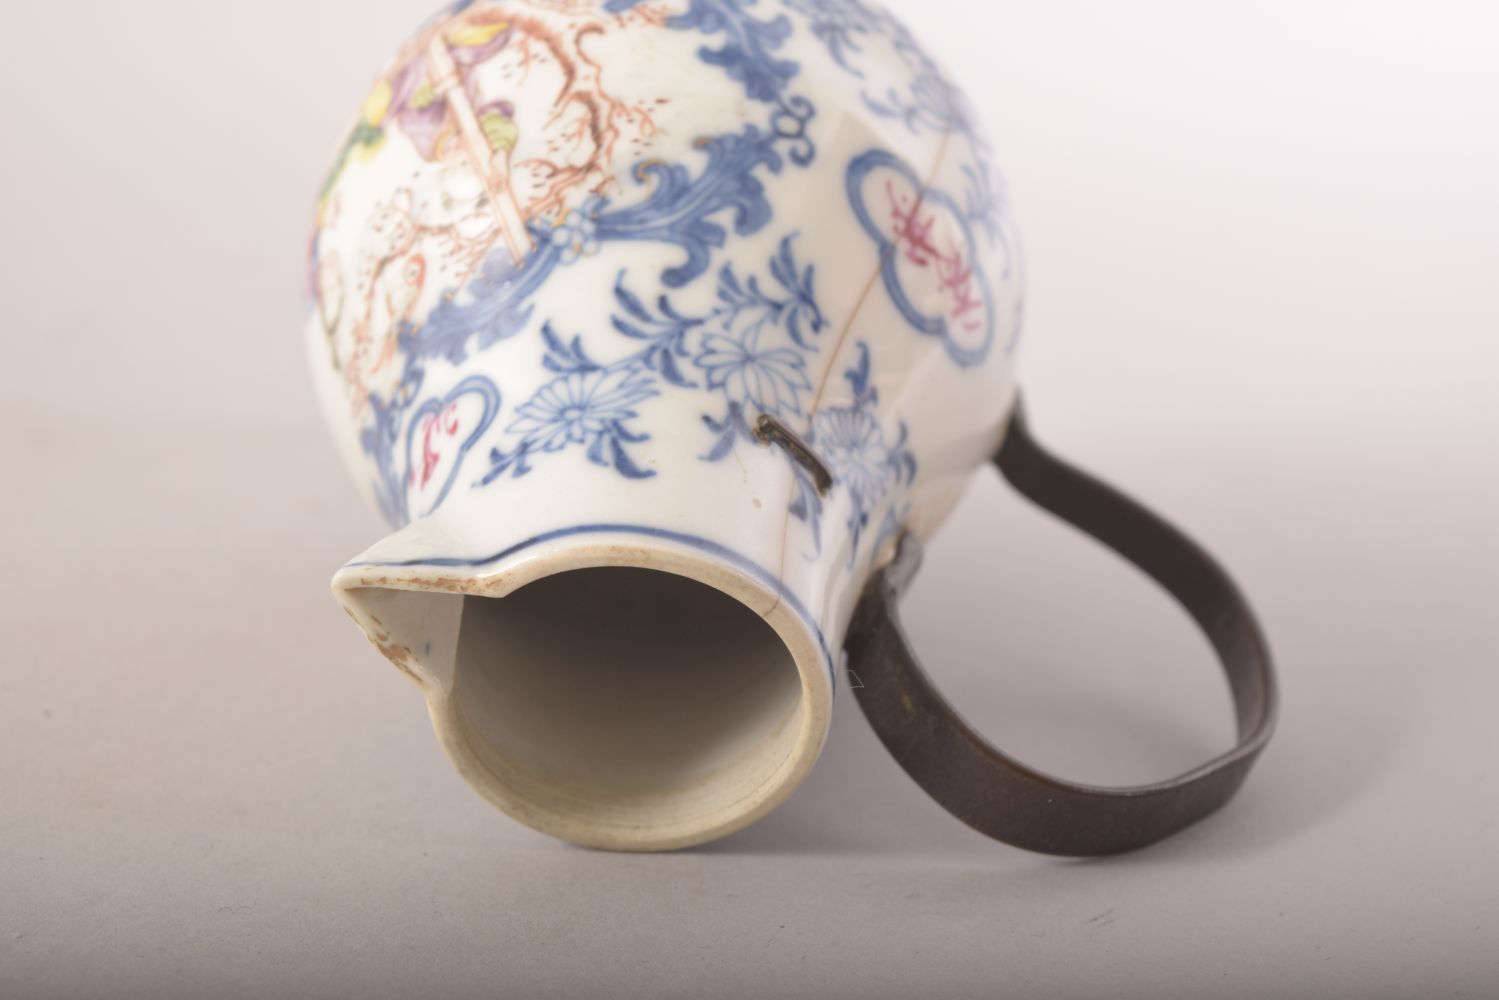 A SMALL CHINESE PORCELAIN JUG, painted with a panel of figures, mounted metal handle, (af), 11cm - Image 5 of 6